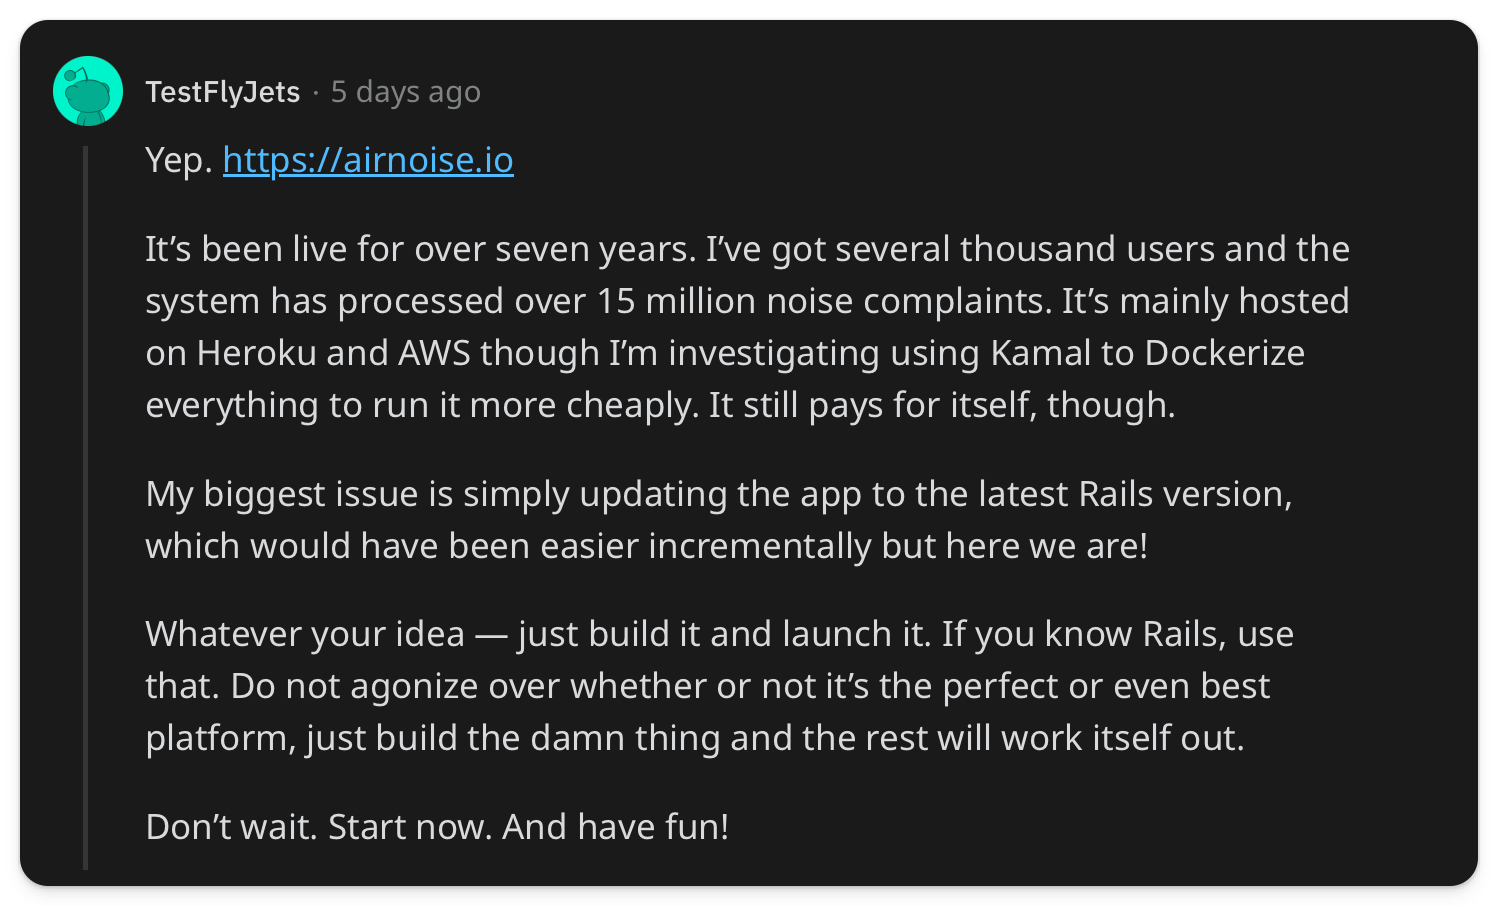 "Its been live for over seven years. Ive got several thousand users and the system has processed over 15 million noise complaints. Its mainly hosted on Heroku and AWS though Im investigating using Kamal to Dockerize everything to run it more cheaply. It still pays for itself, though. My biggest issue is simply updating the app to the latest Rails version, which would have been easier incrementally but here we are! Whatever your idea  just build it and launch it. If you know Rails, use that. Do not agonize over whether or not its the perfect or even best platform, just build the damn thing and the rest will work itself out. Dont wait. Start now. And have fun!"